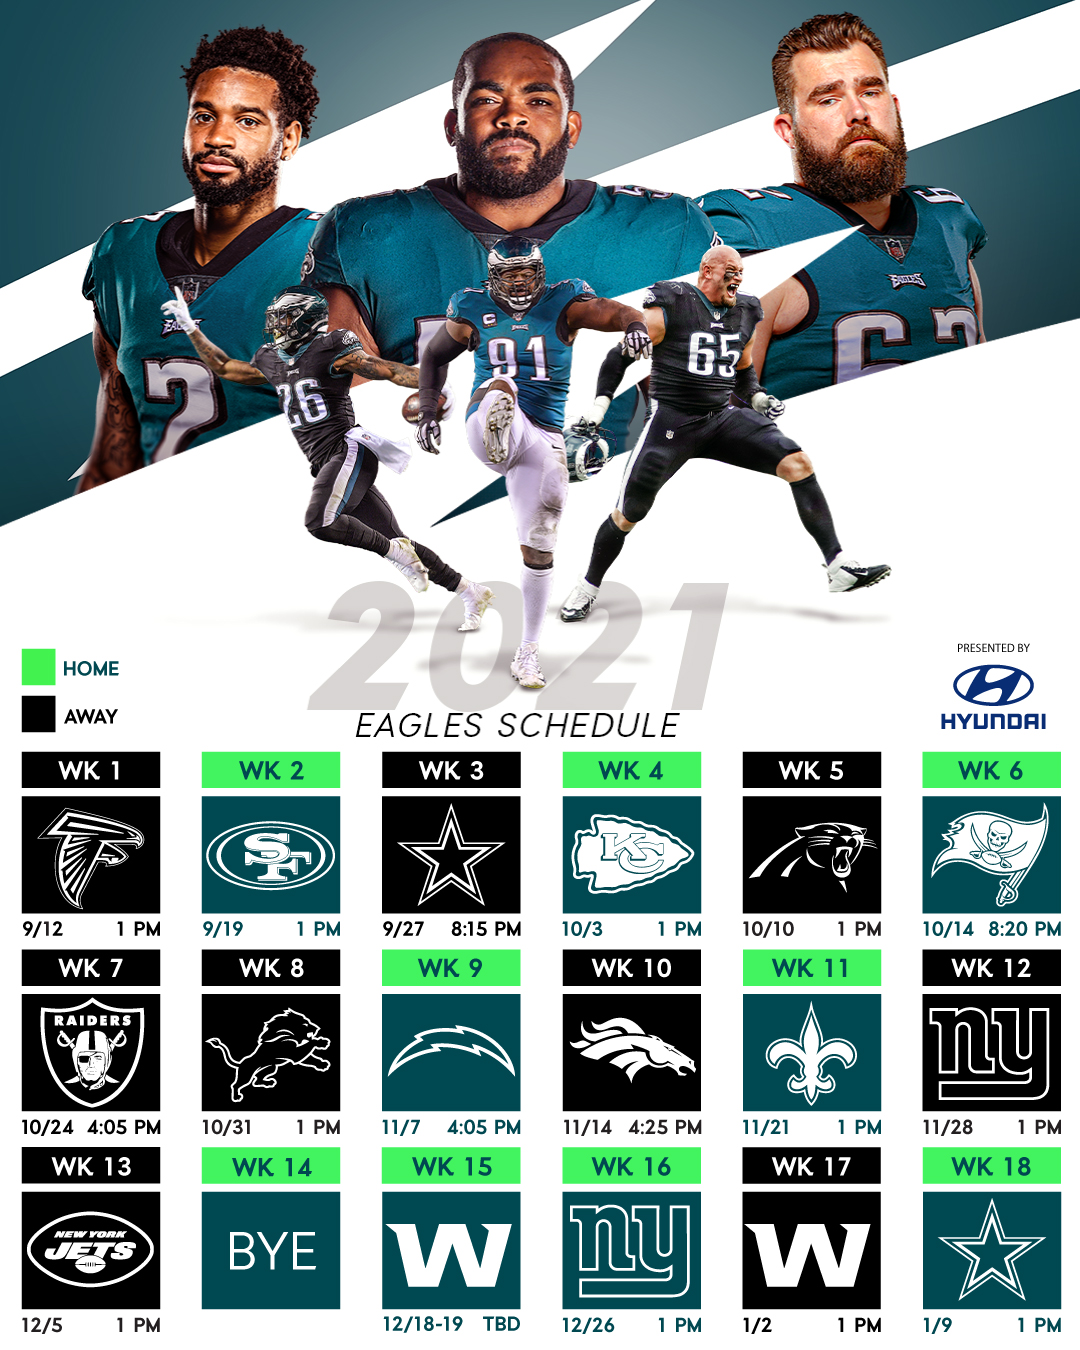 Future Philadelphia Eagles Schedules and Opponents